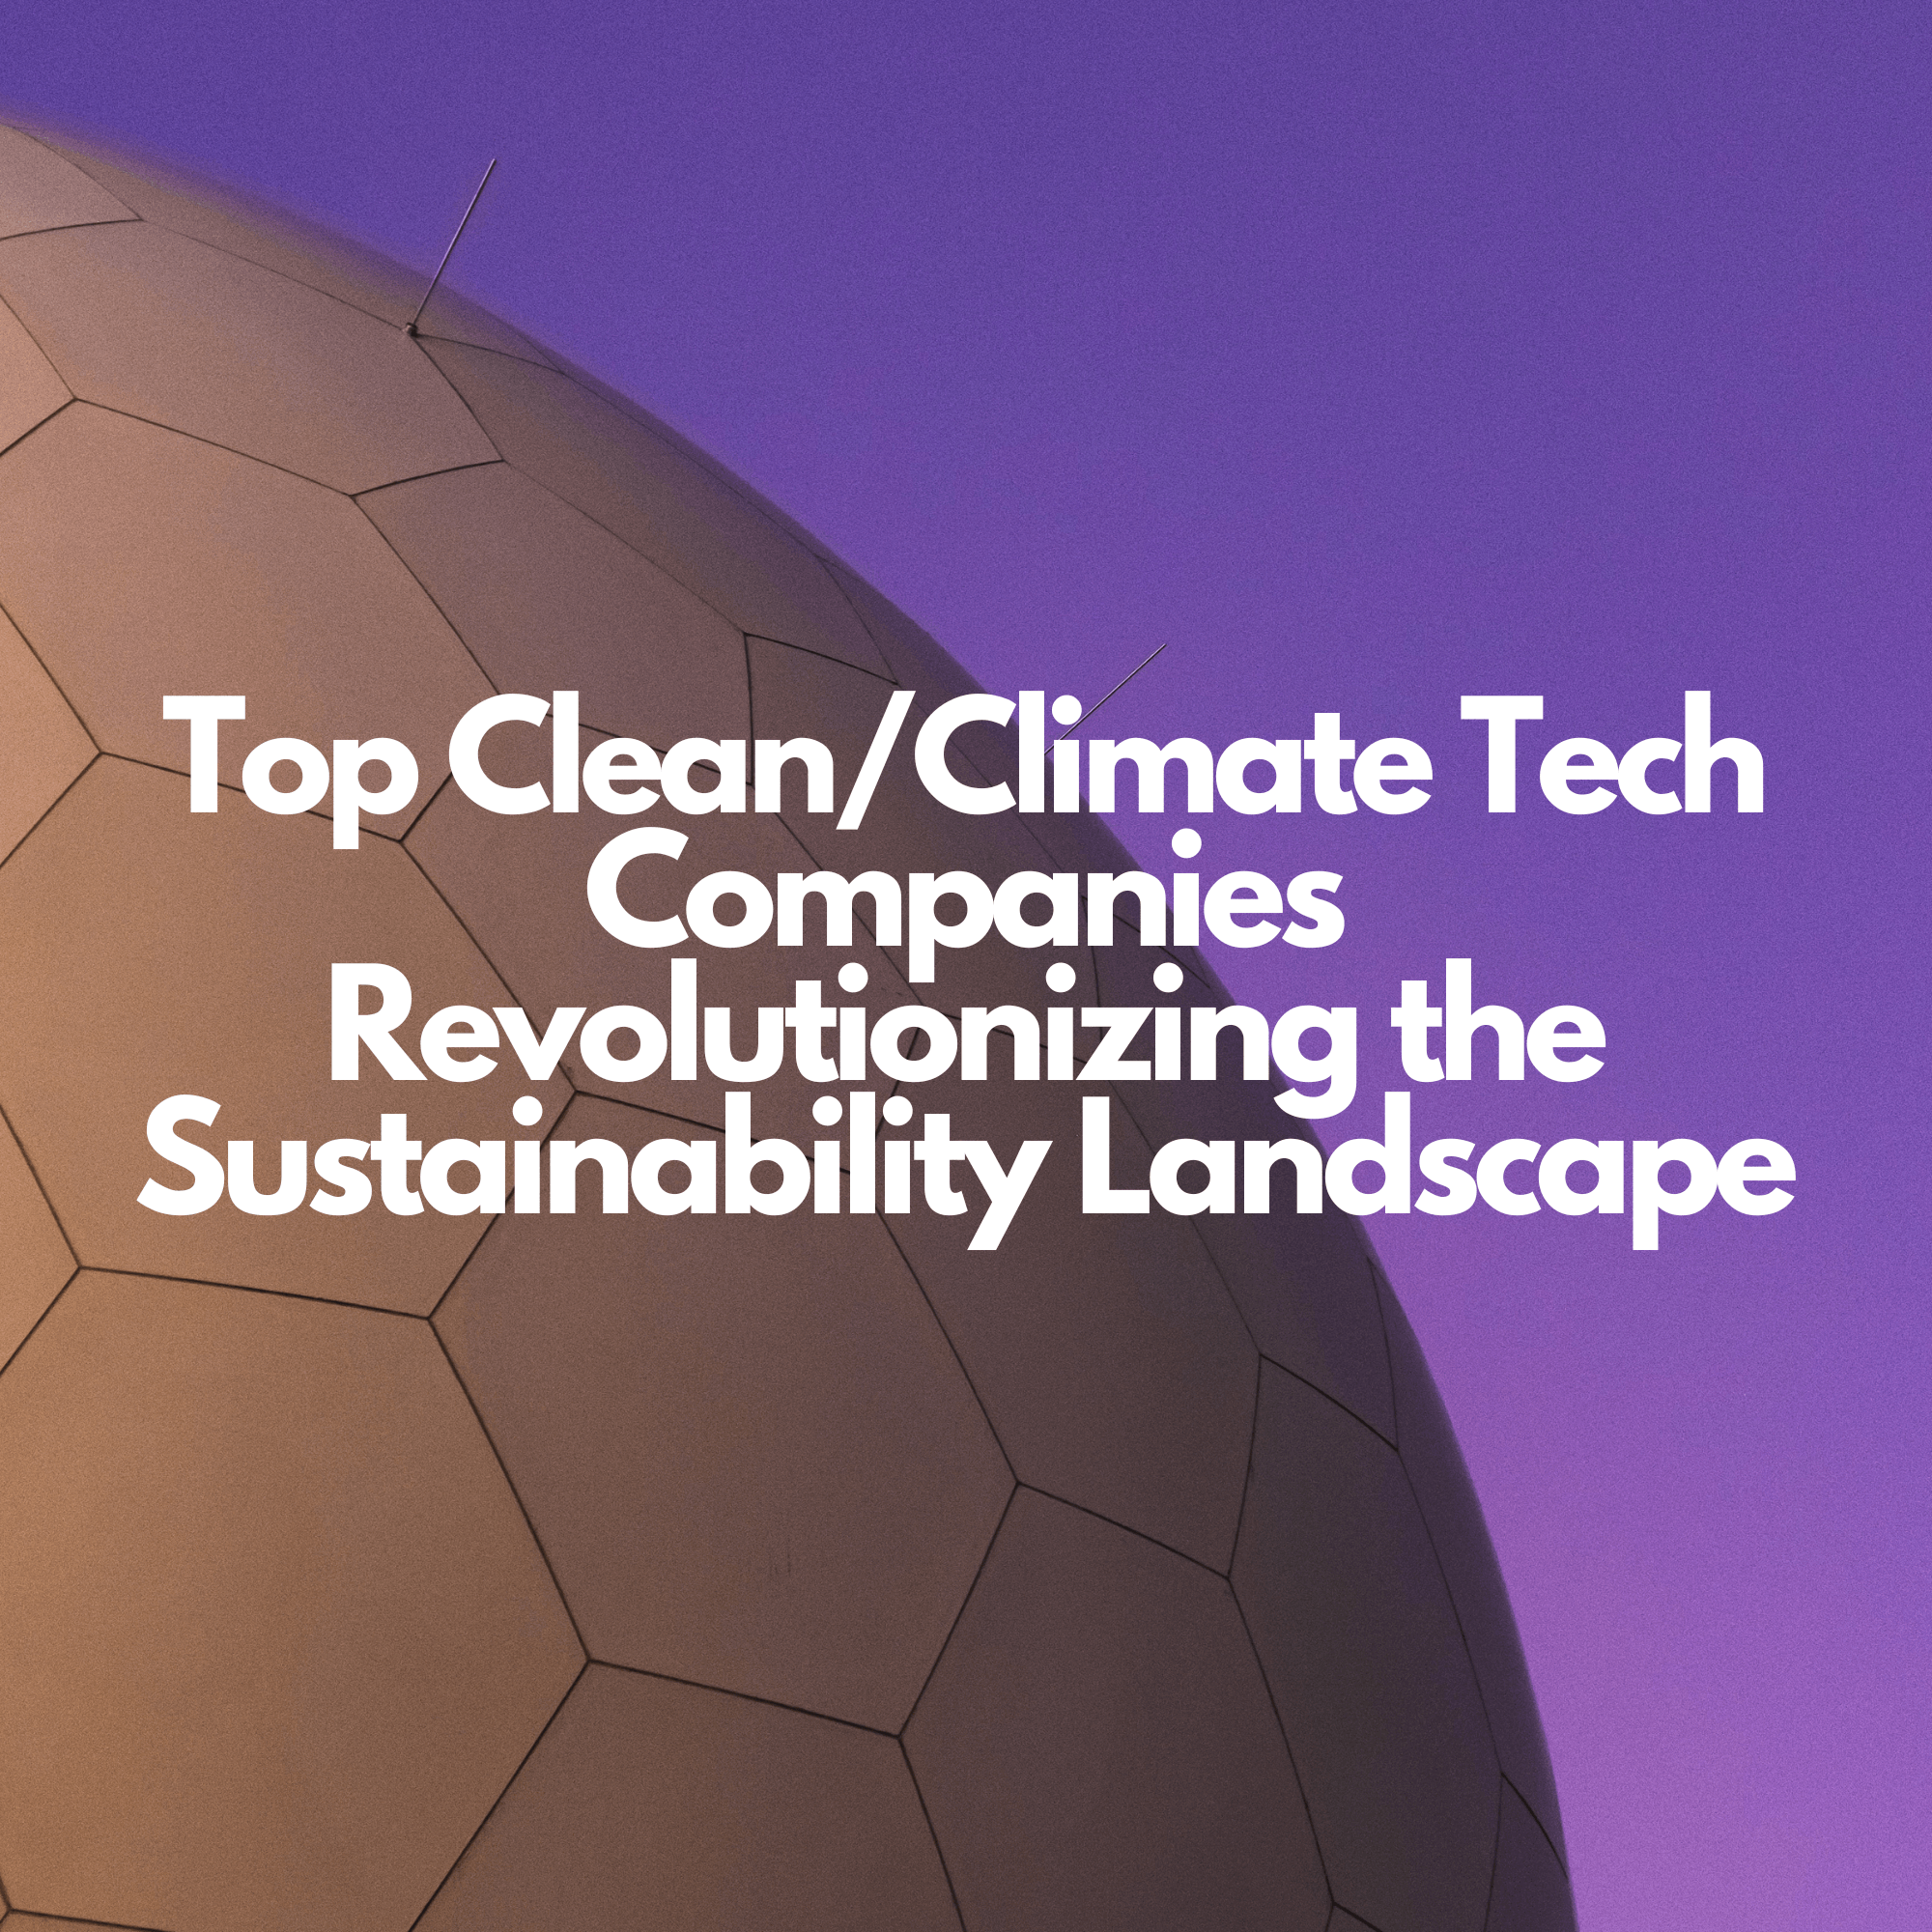 Top Clean/Climate Tech Companies Revolutionizing the Sustainability Landscape